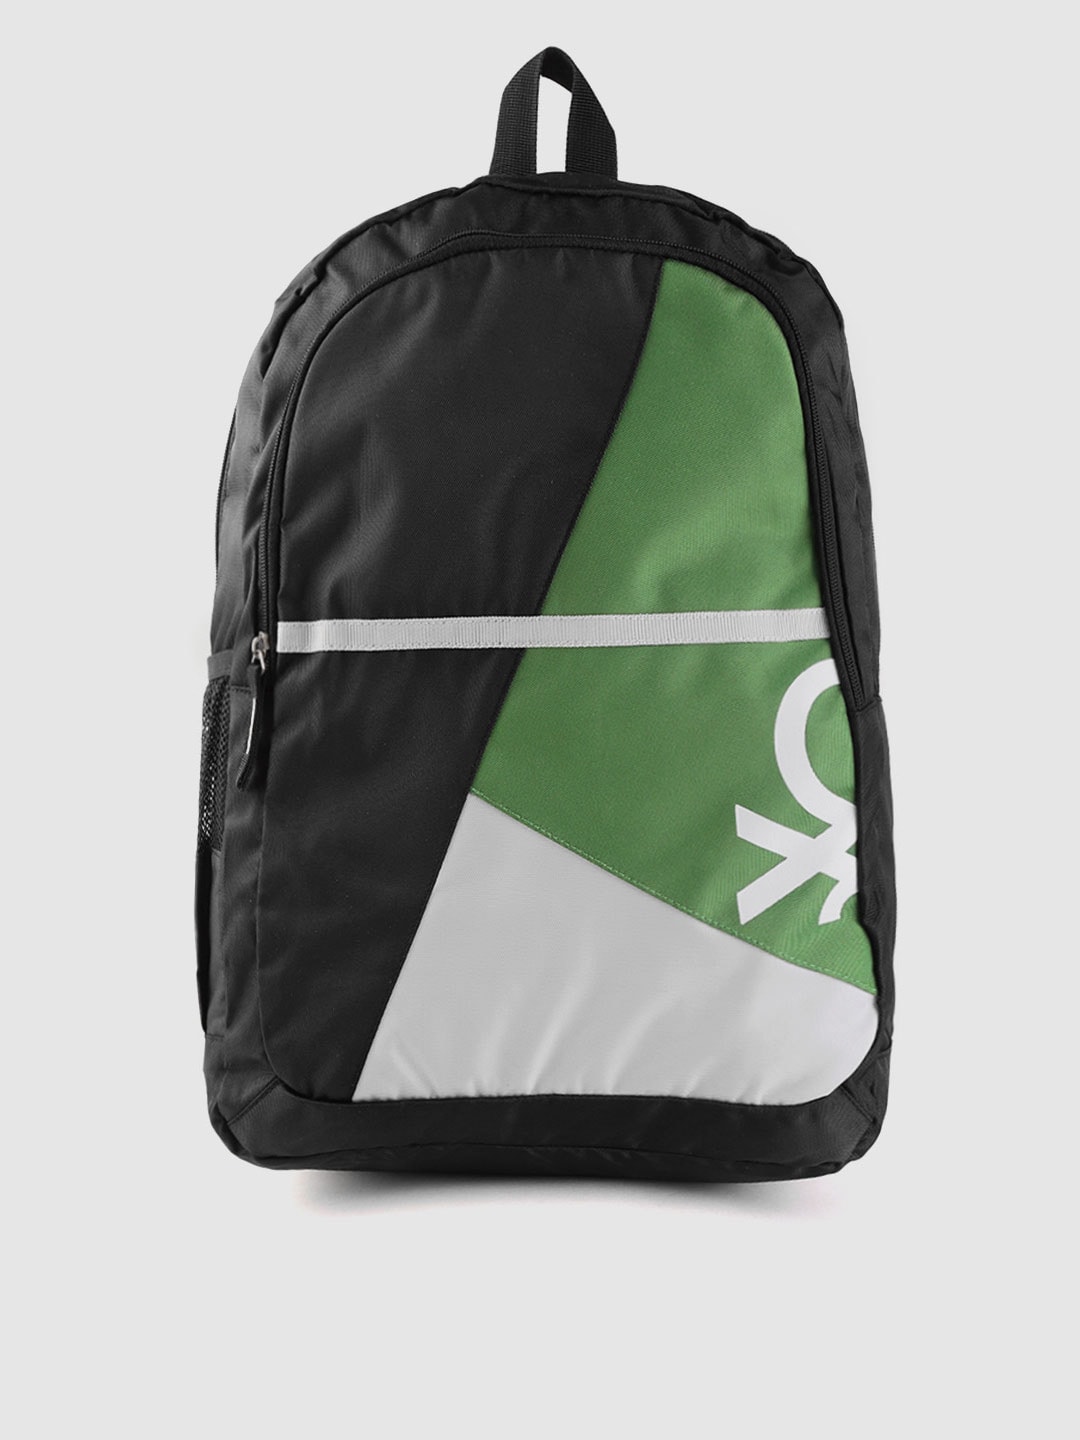 United Colors of Benetton Unisex Black & Green Colourblocked Laptop Backpack Price in India